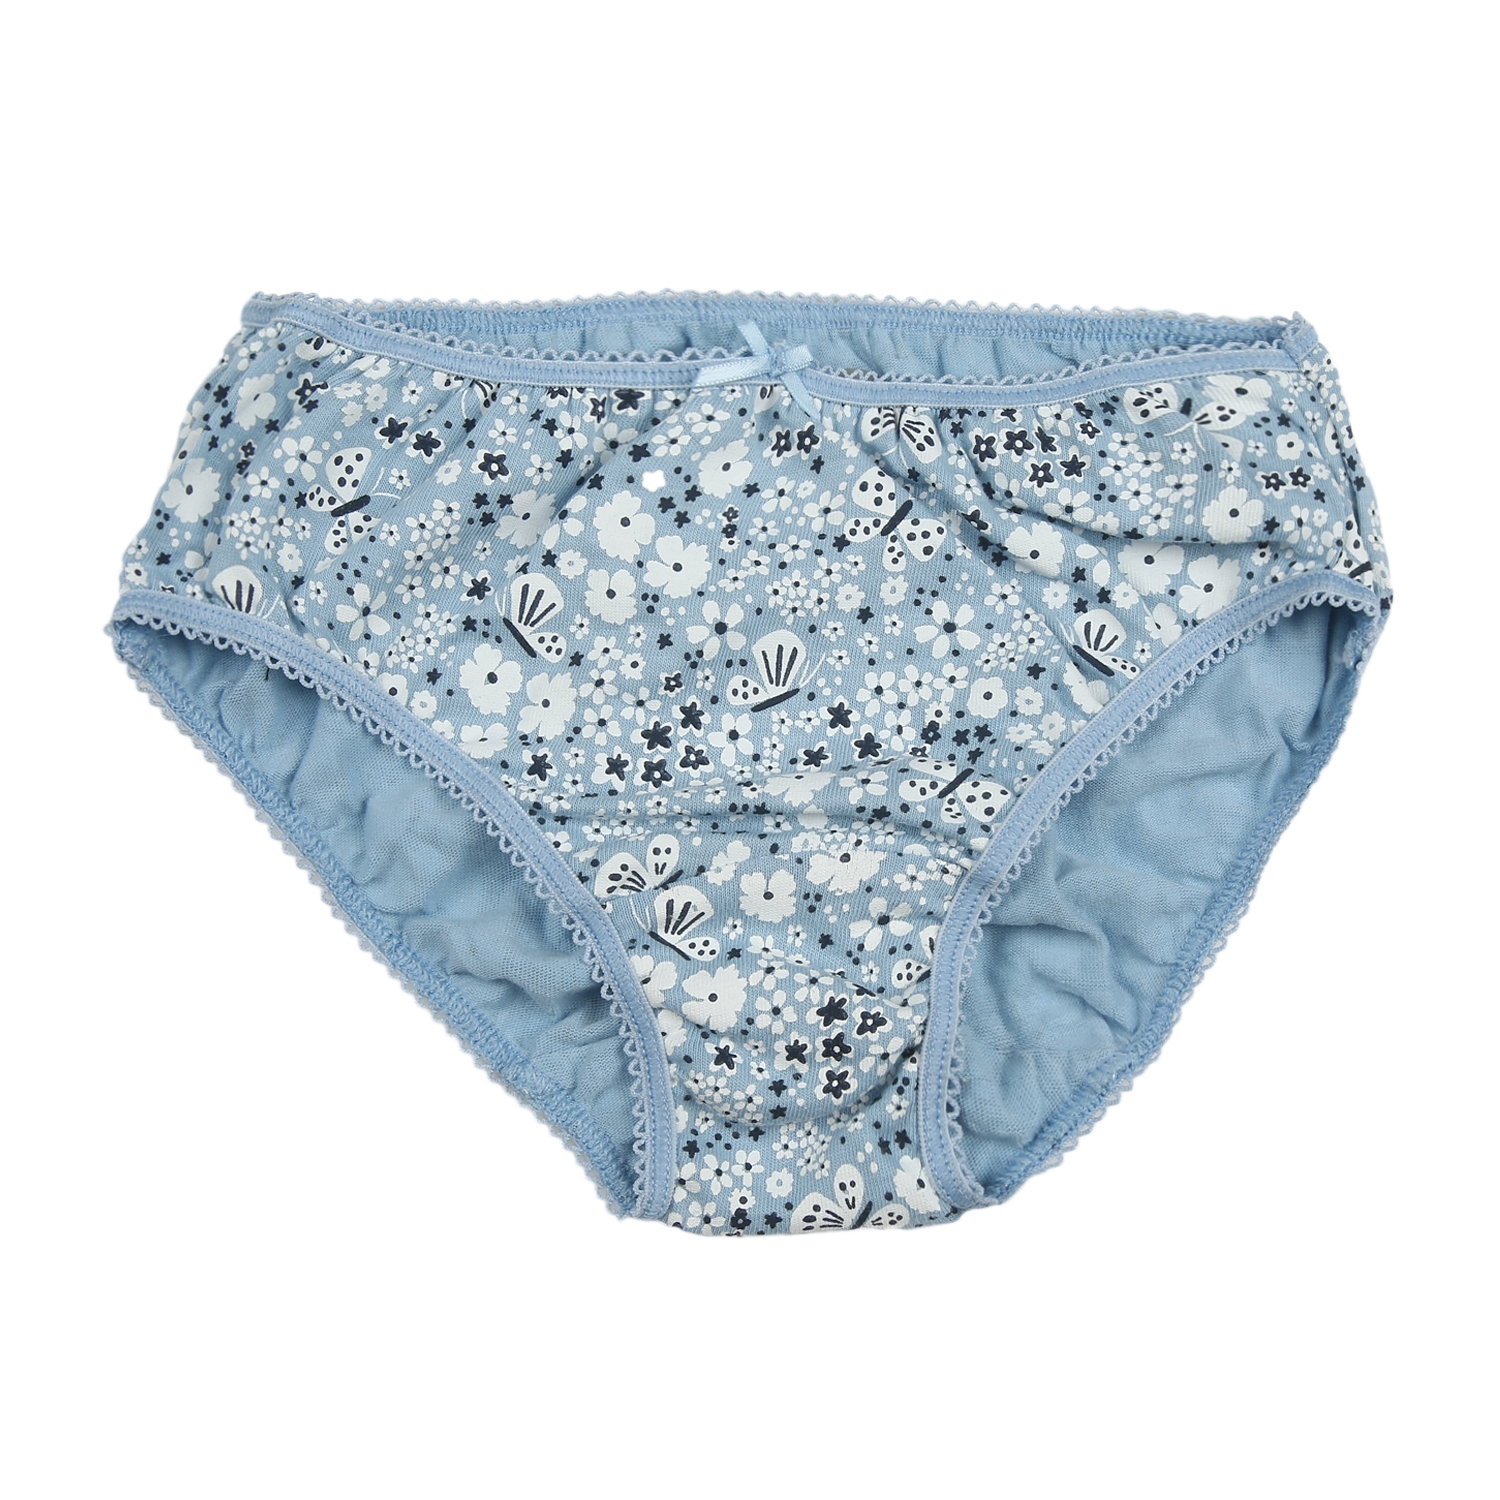 Mothercare | Girls Floral print Briefs - Pack of 3 - Blue white 1